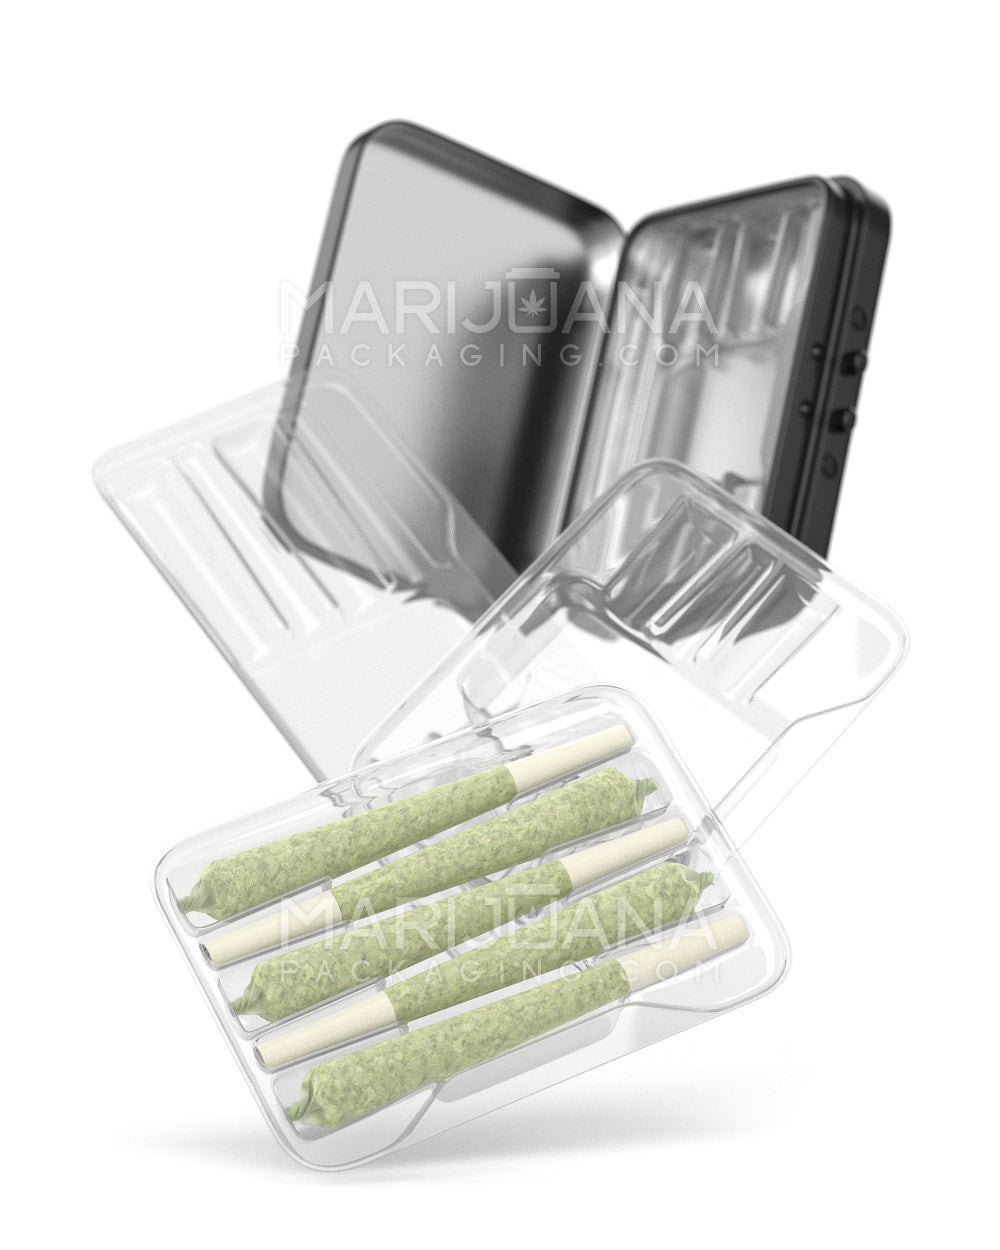 Edible & Joint Box Insert Tray for 4 King Size Pre Rolled Cones | 109mm - Clear Plastic - 100 Count - 9